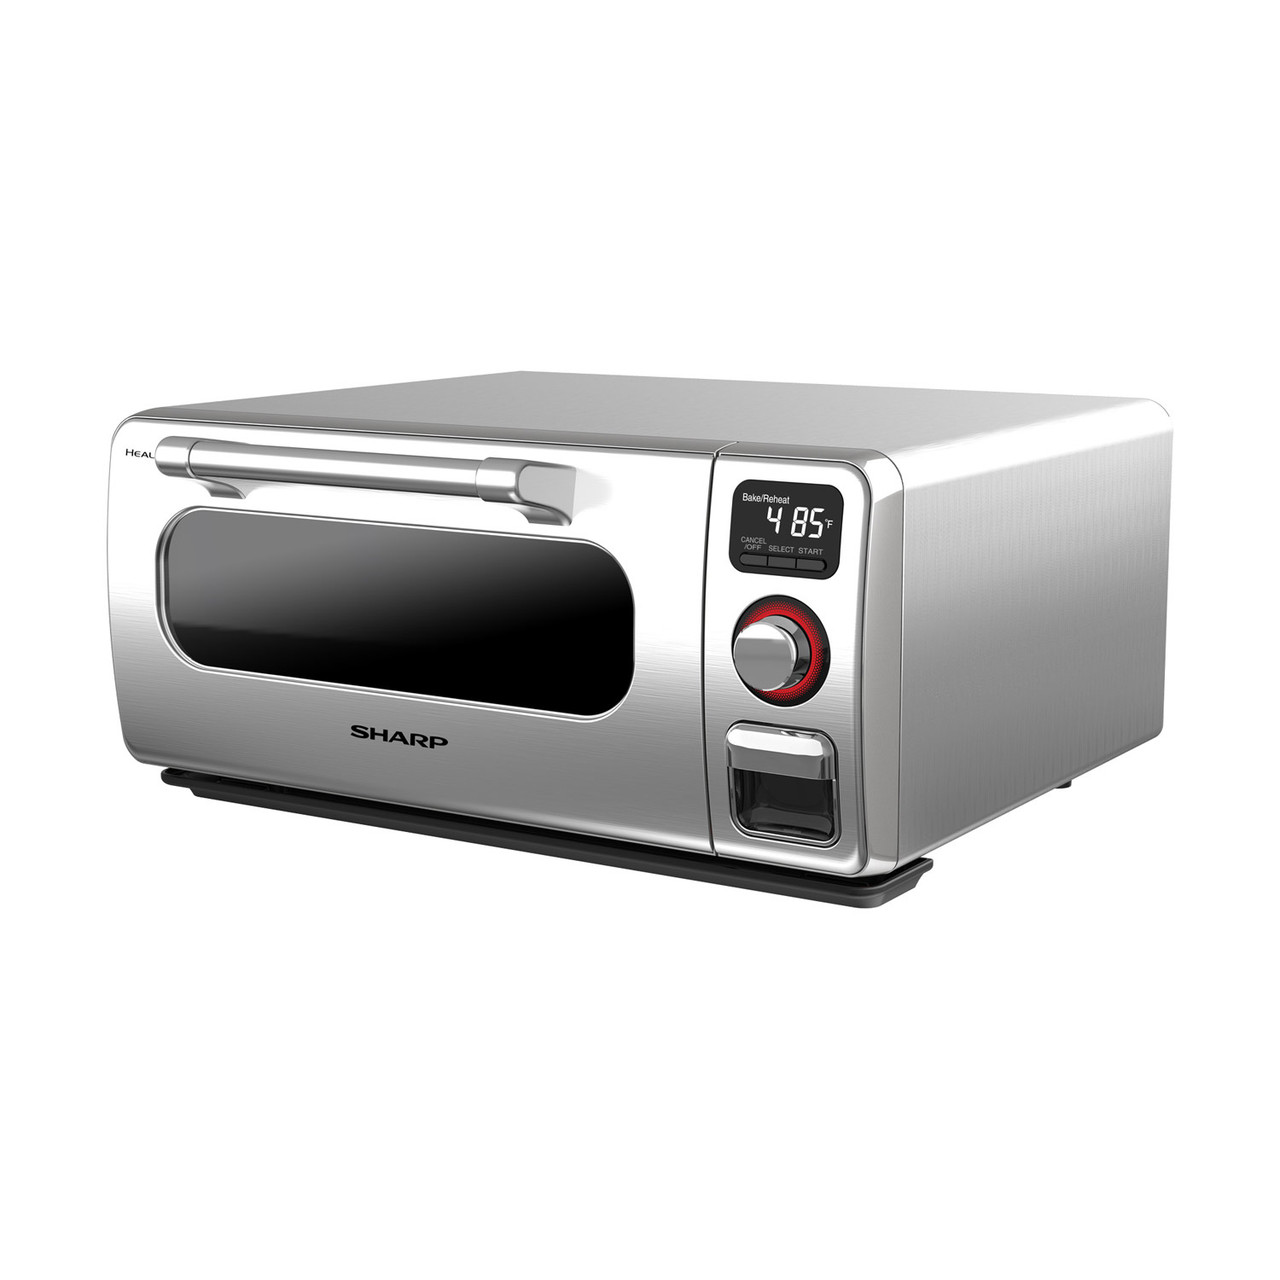 Sharp Superheated Steam Countertop Oven (SSC0586DS) – left angle view